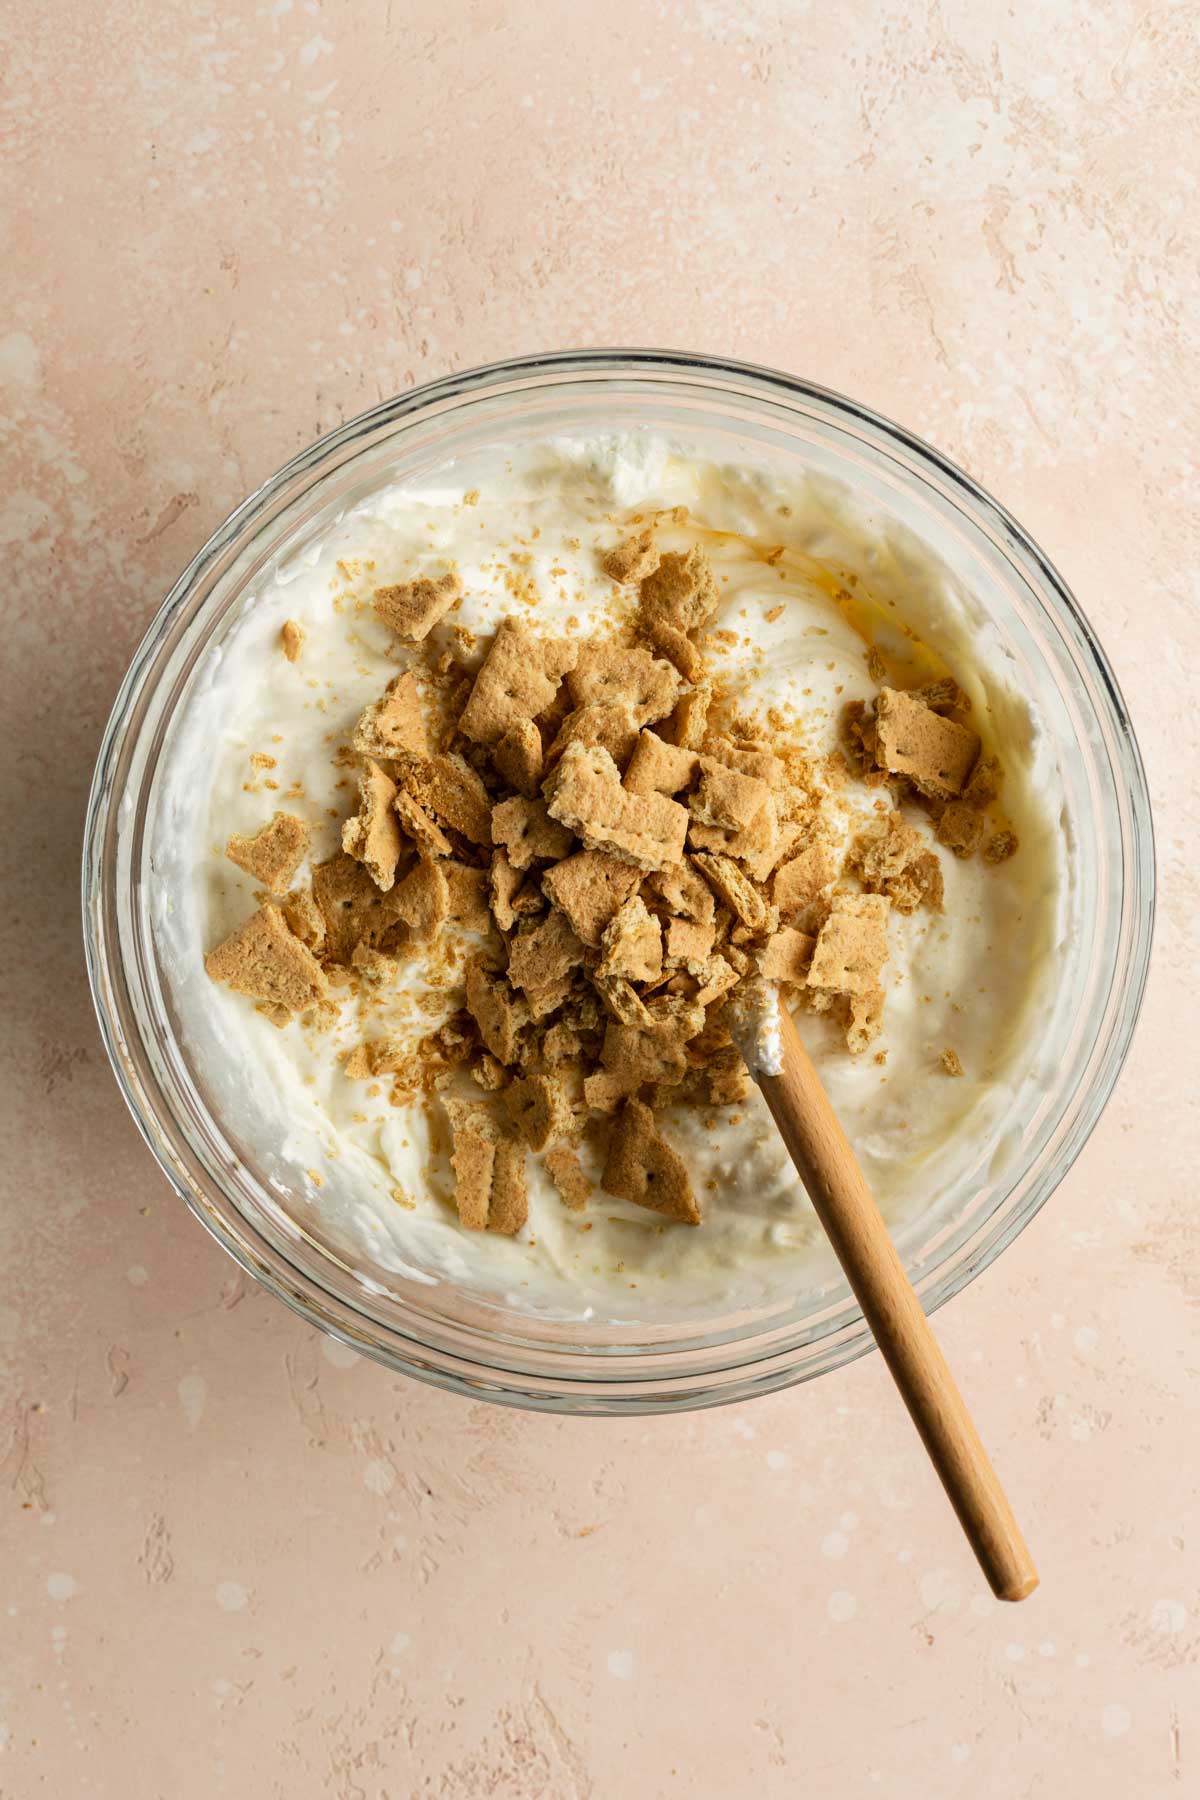 Chopped graham crackers added to the ice cream mixture in a glass bowl.